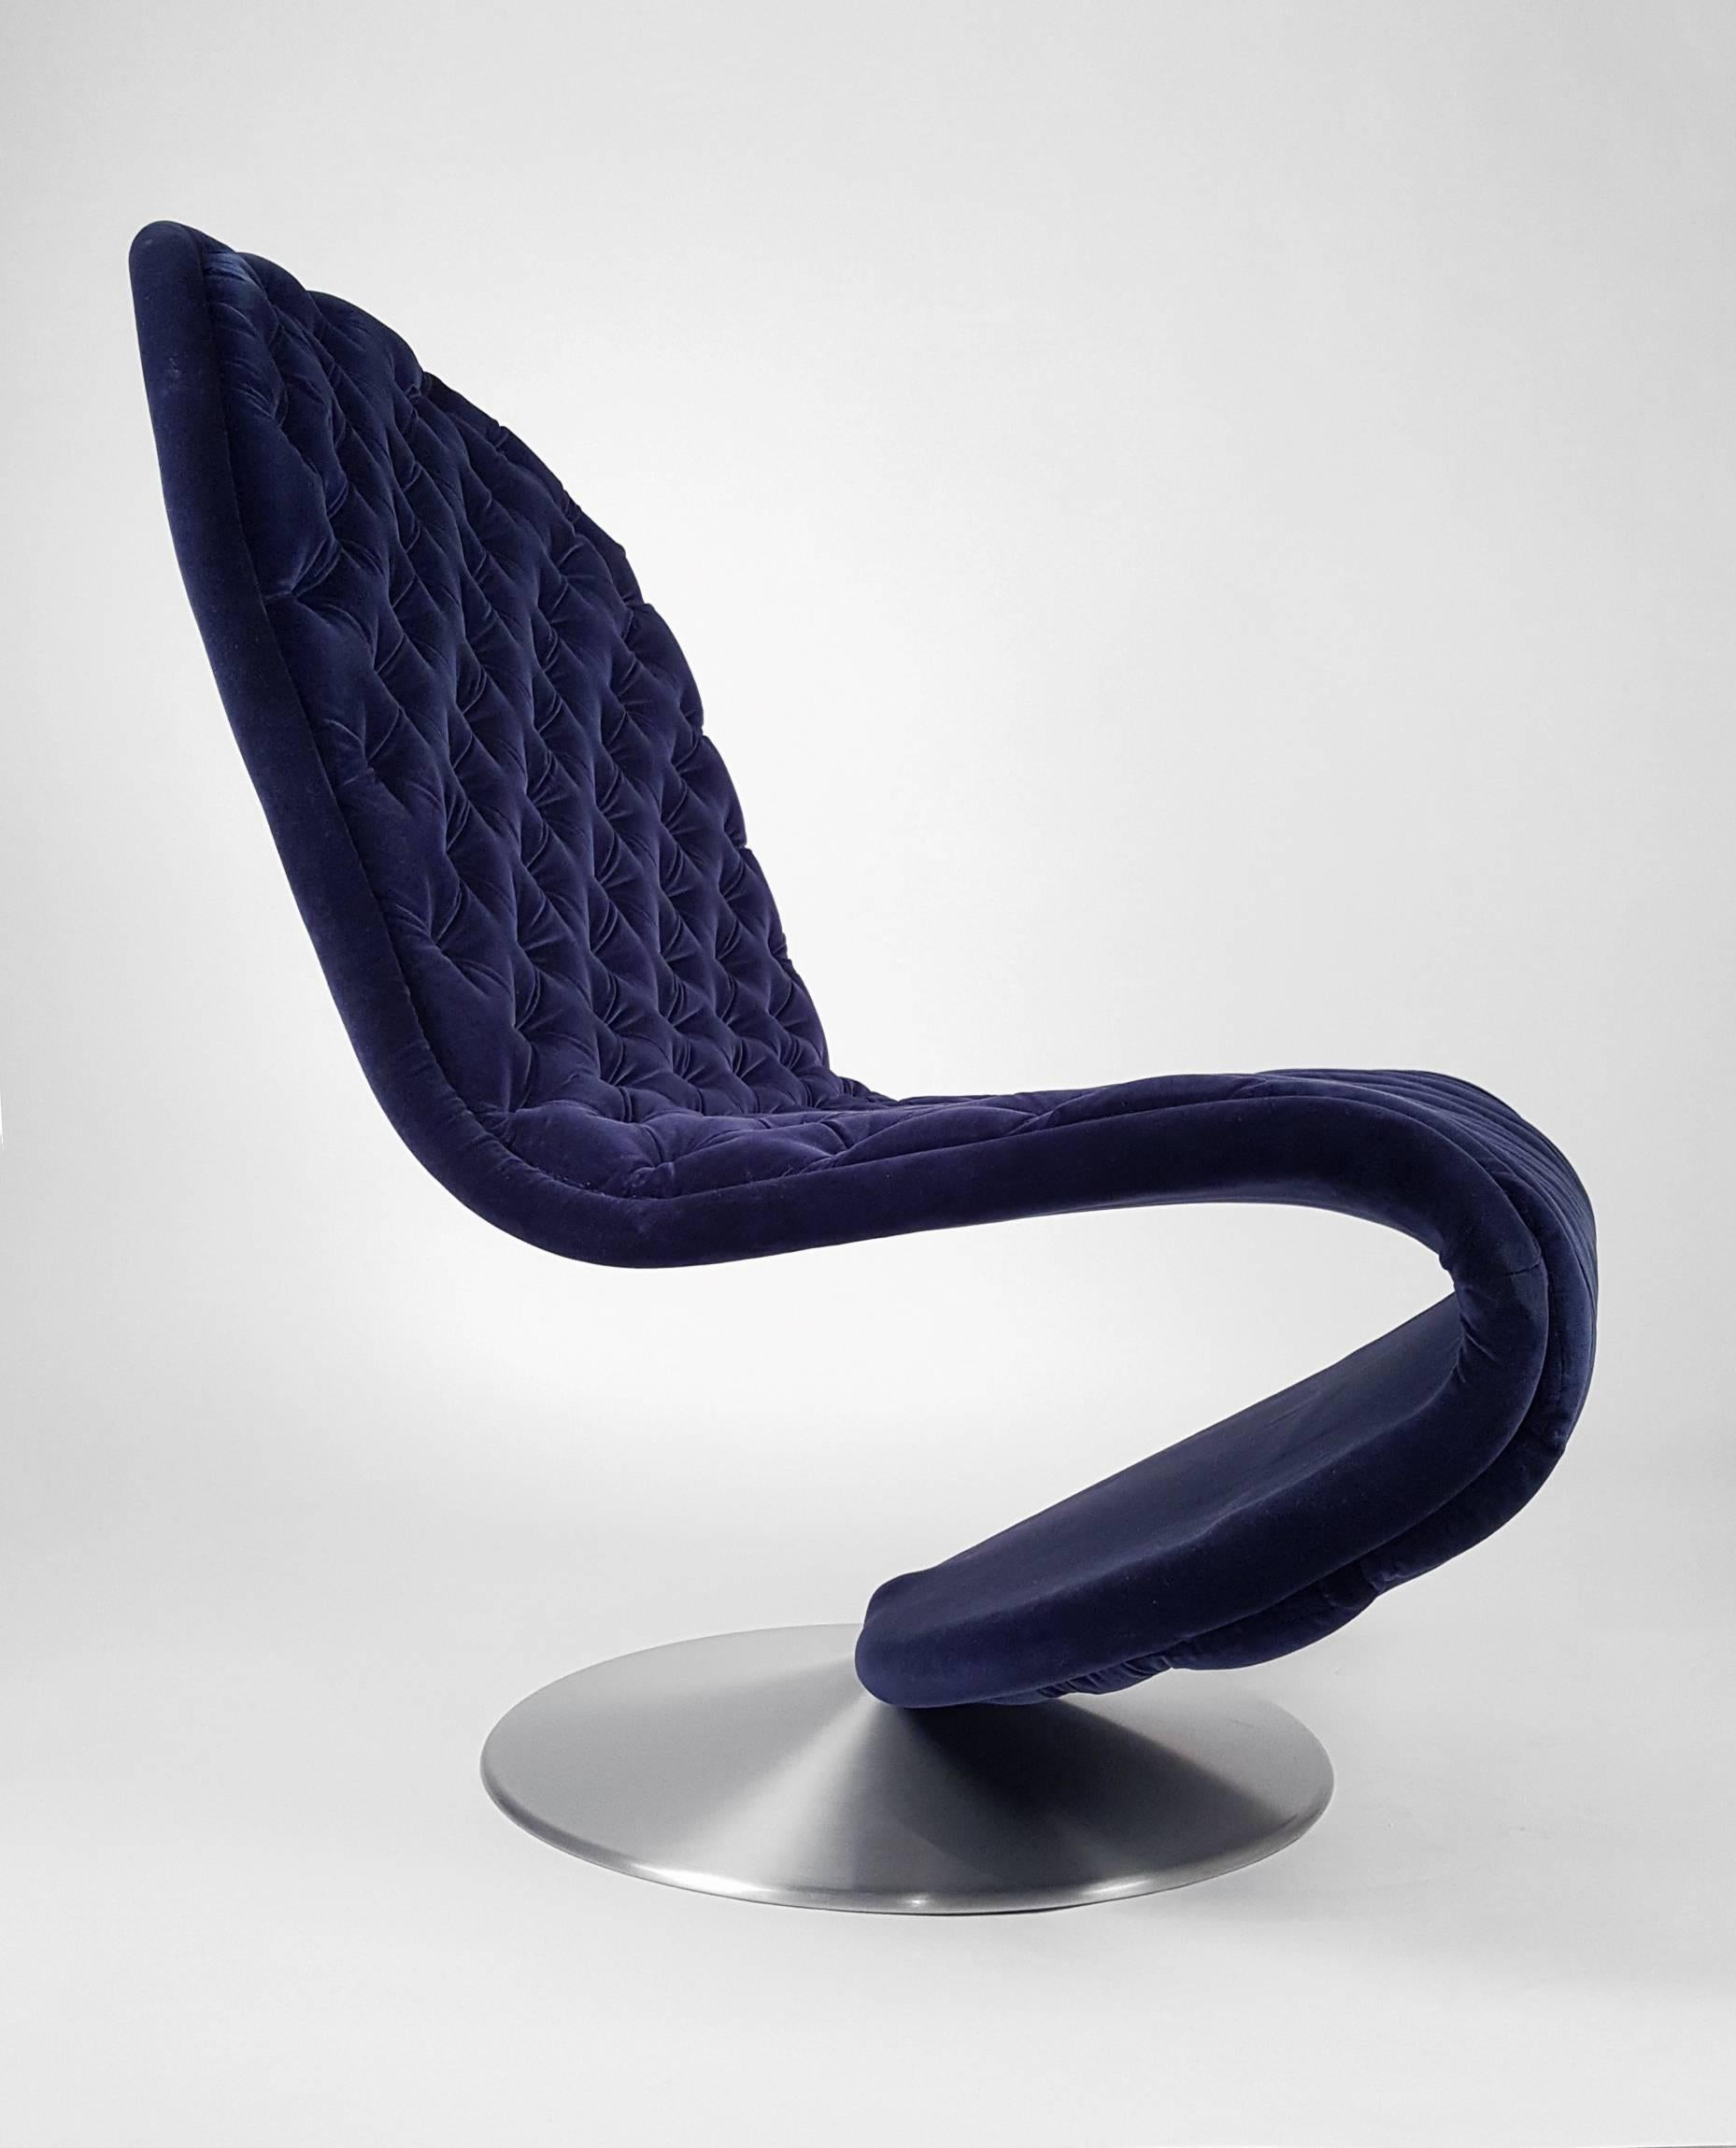 Navy blue velvet upholstered Panton System 123 lounge chair. It is difficult to capture how luxurious the upholstery on this chair looks in person. It swivels and is very stylish and comfortable. Truly a work of art from the Danish master of design!